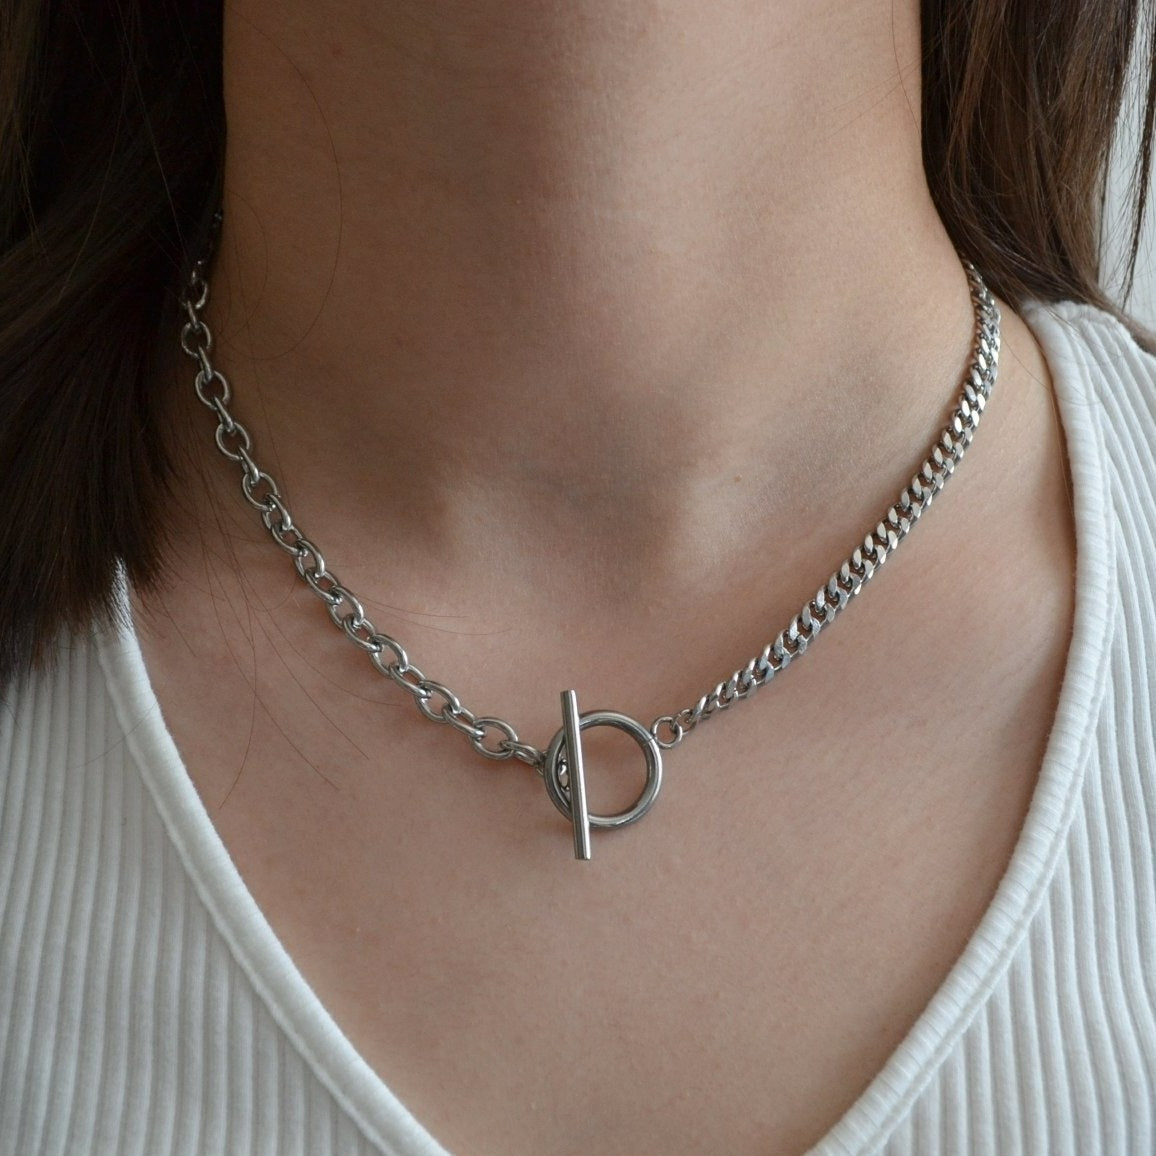 Chunky Silver 6mm Curb Chain Necklace For Men or Women - Boutique Wear RENN